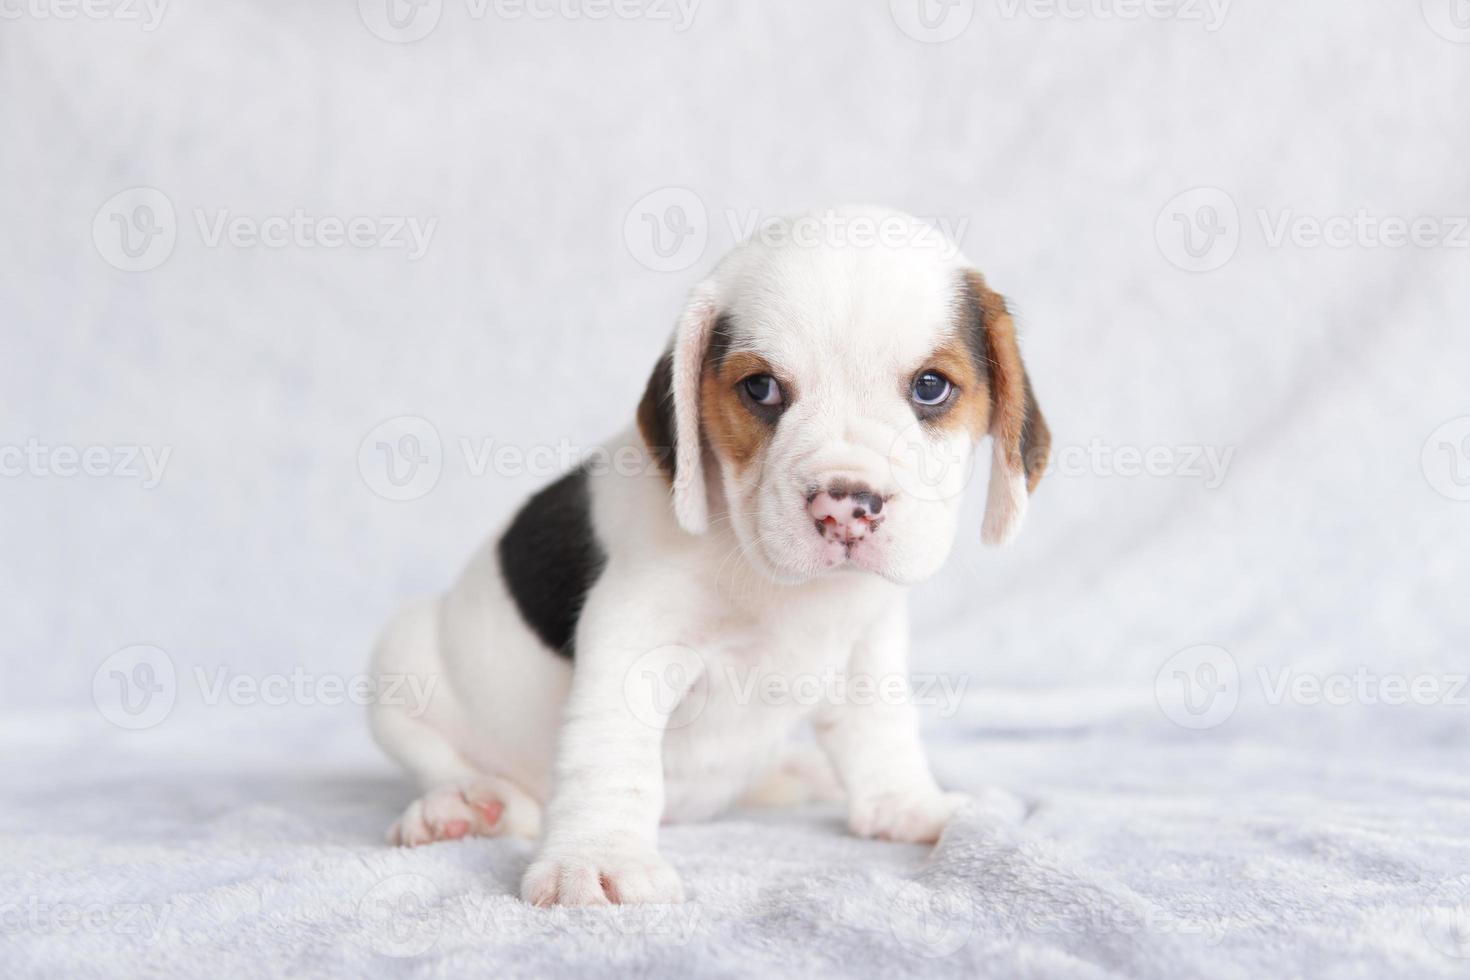 The general appearance of the beagle resembles a miniature Foxhound.The beagle was developed primarily for hunting hare. Possessing a great sense of smell and superior tracking instincts. photo